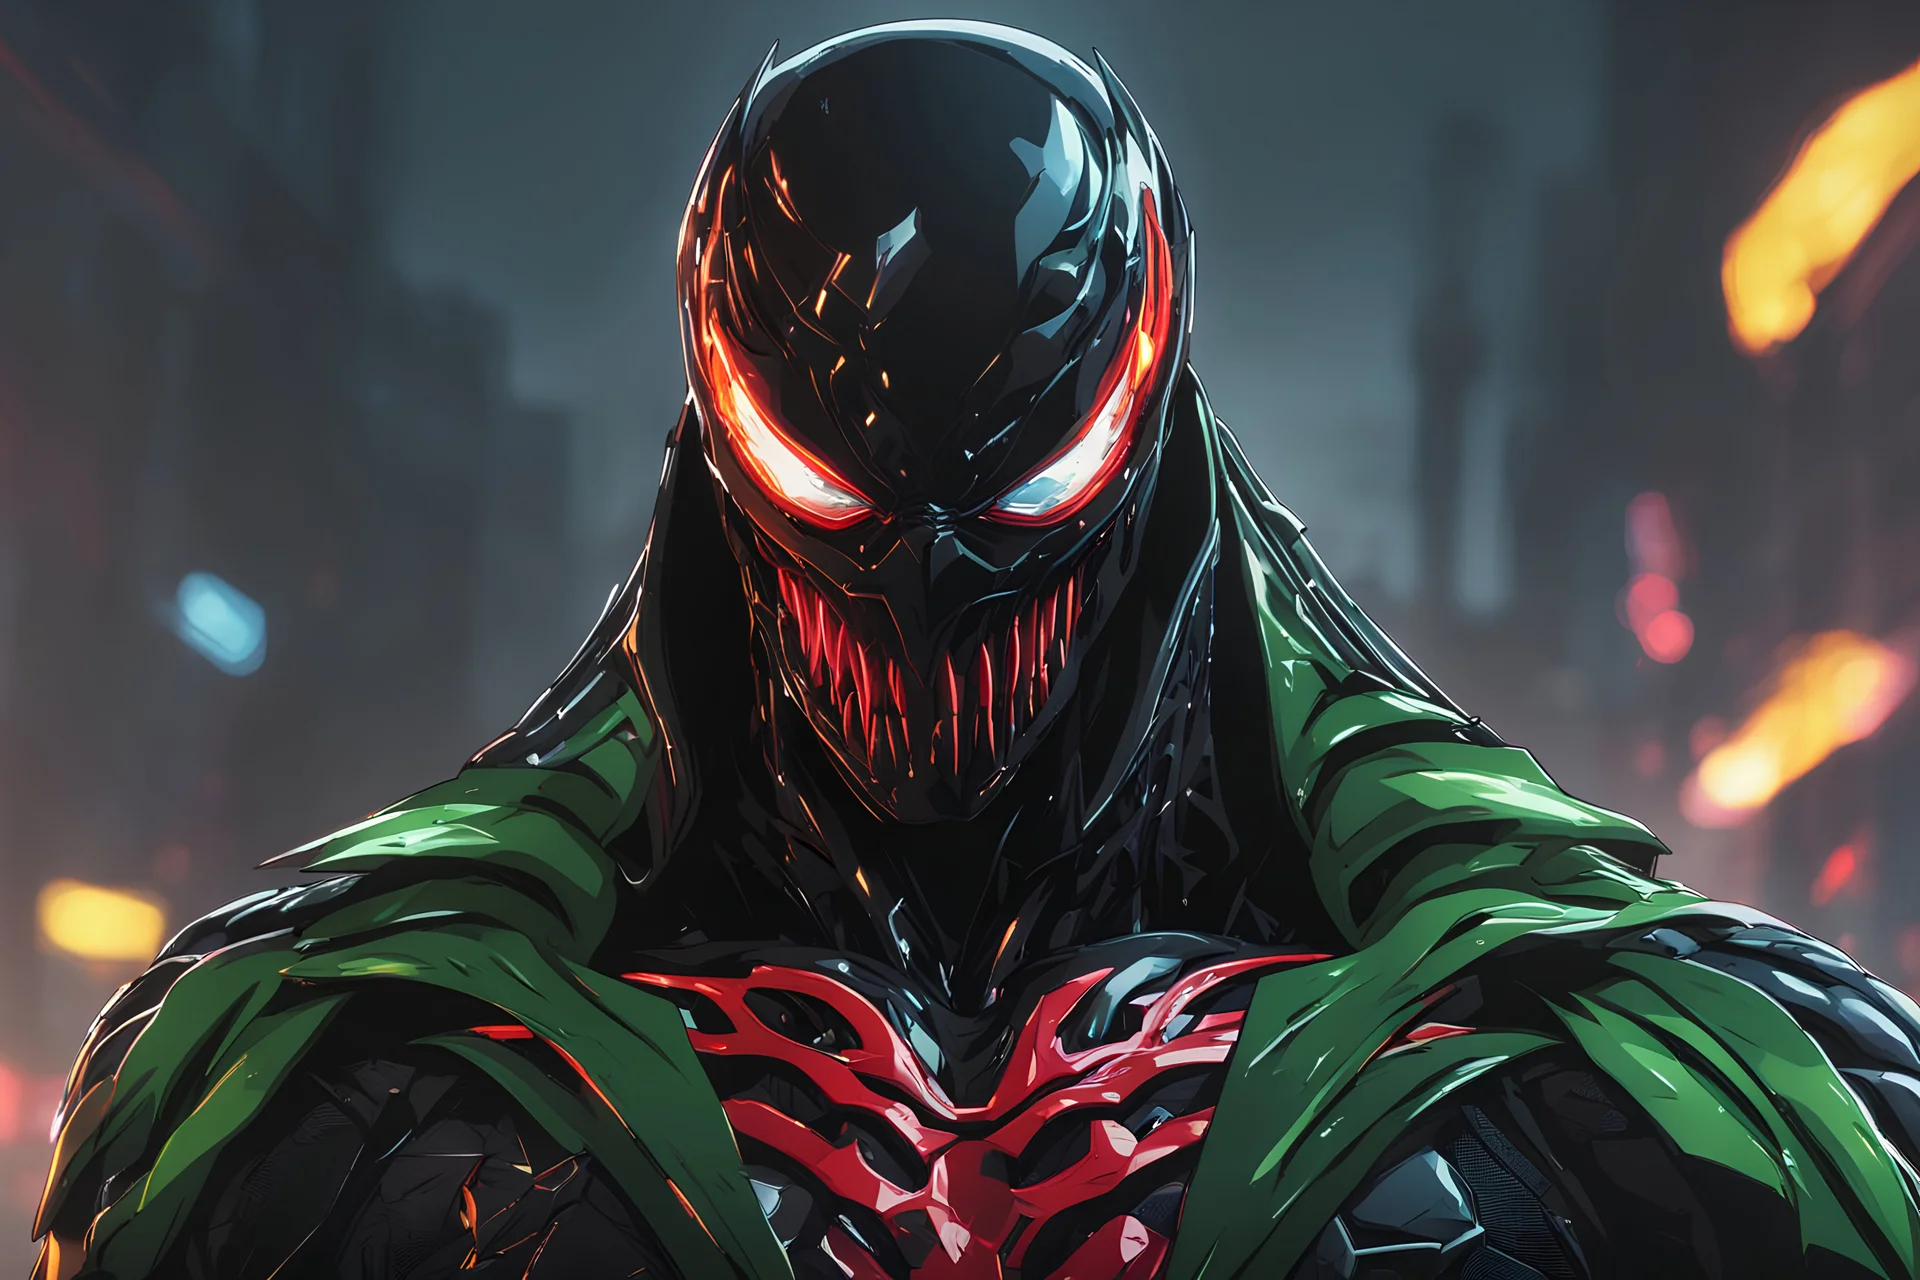 Venom Shredder in 8k solo leveling shadow artstyle, machine them, close picture, rain, neon lights, intricate details, highly detailed, high details, detailed portrait, masterpiece,ultra detailed, ultra quality, green ,yellow,red flag on back ground